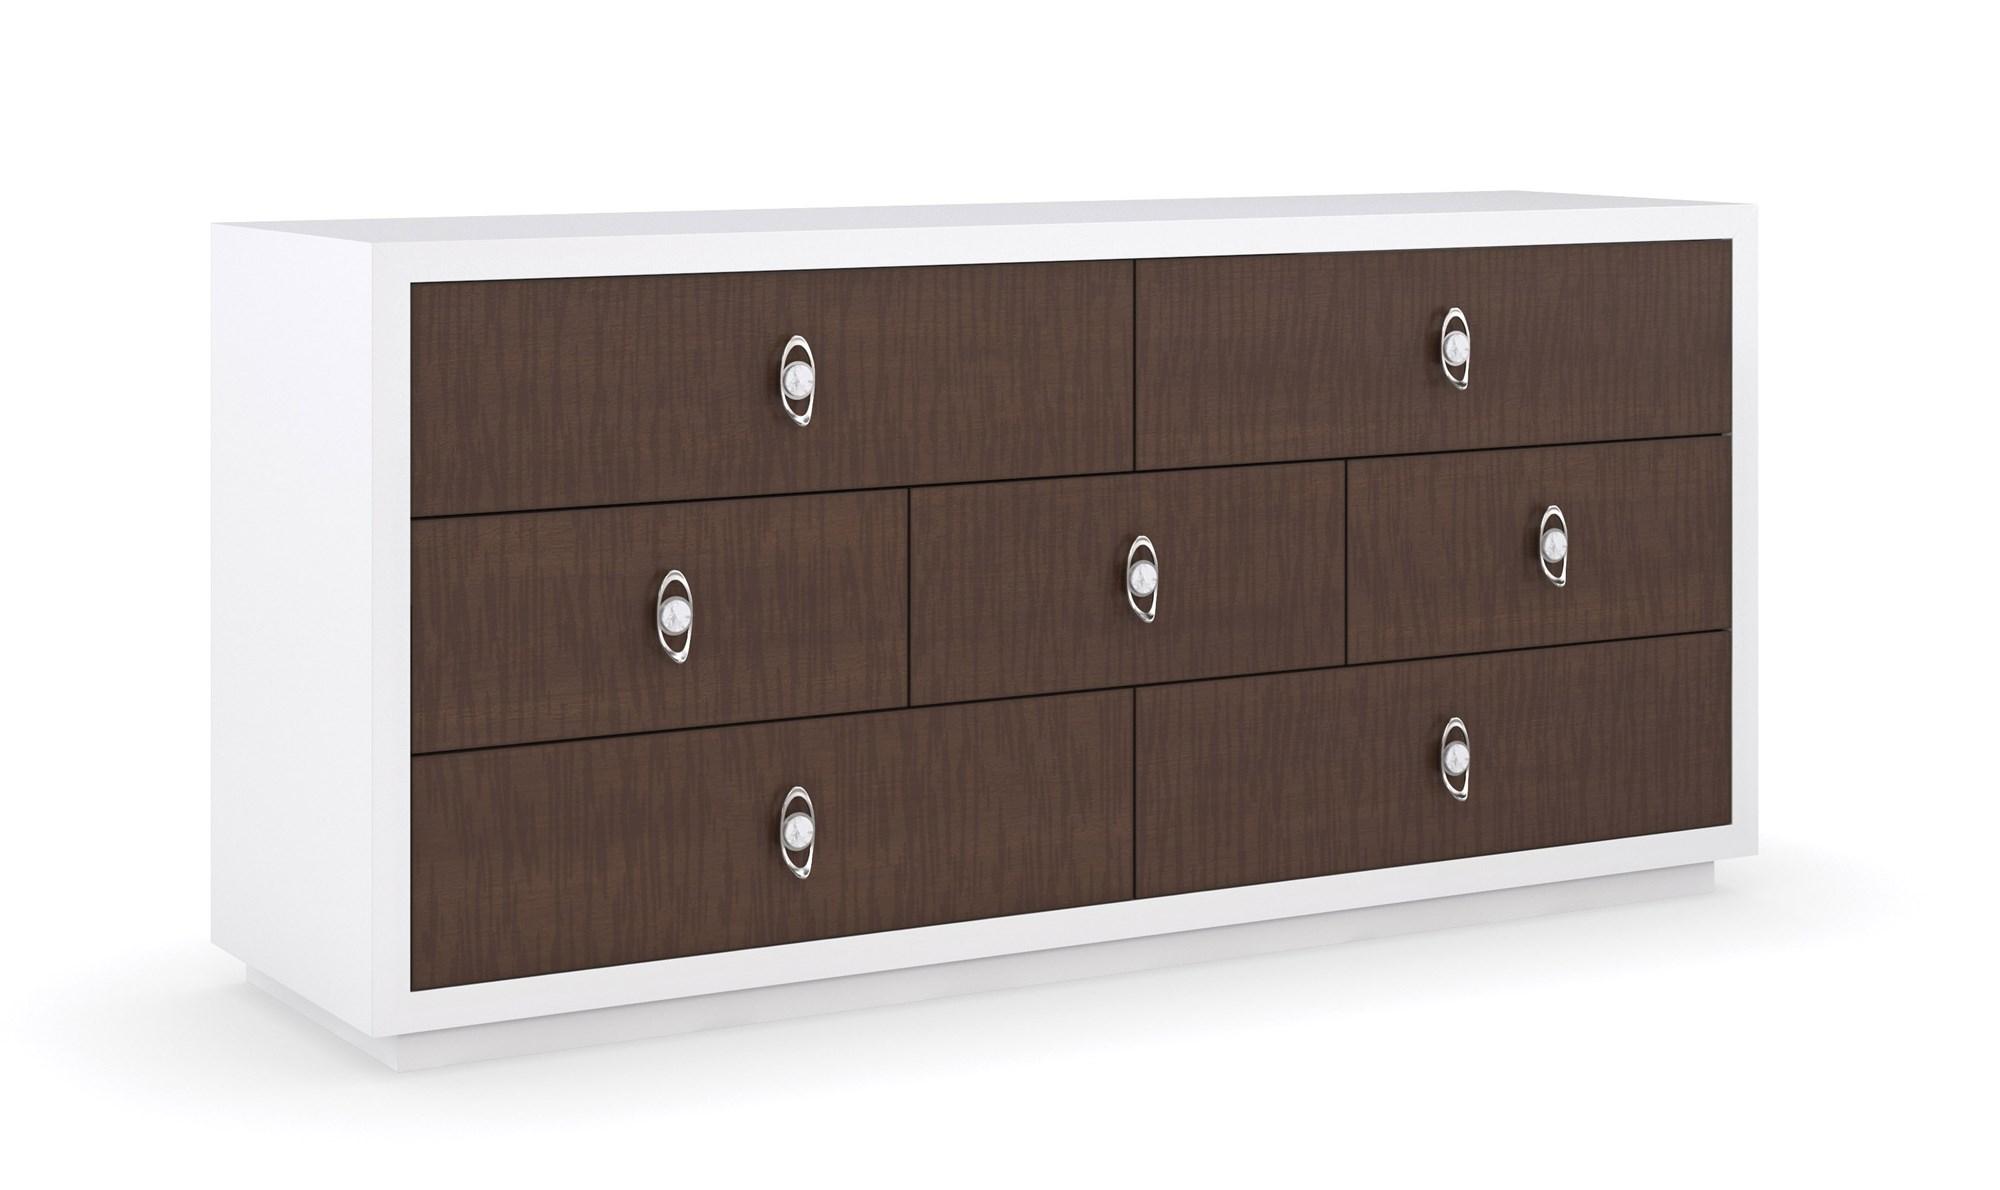 

    
Brunette & Cloud White Finish Dresser ON THE CONTRARY by Caracole
